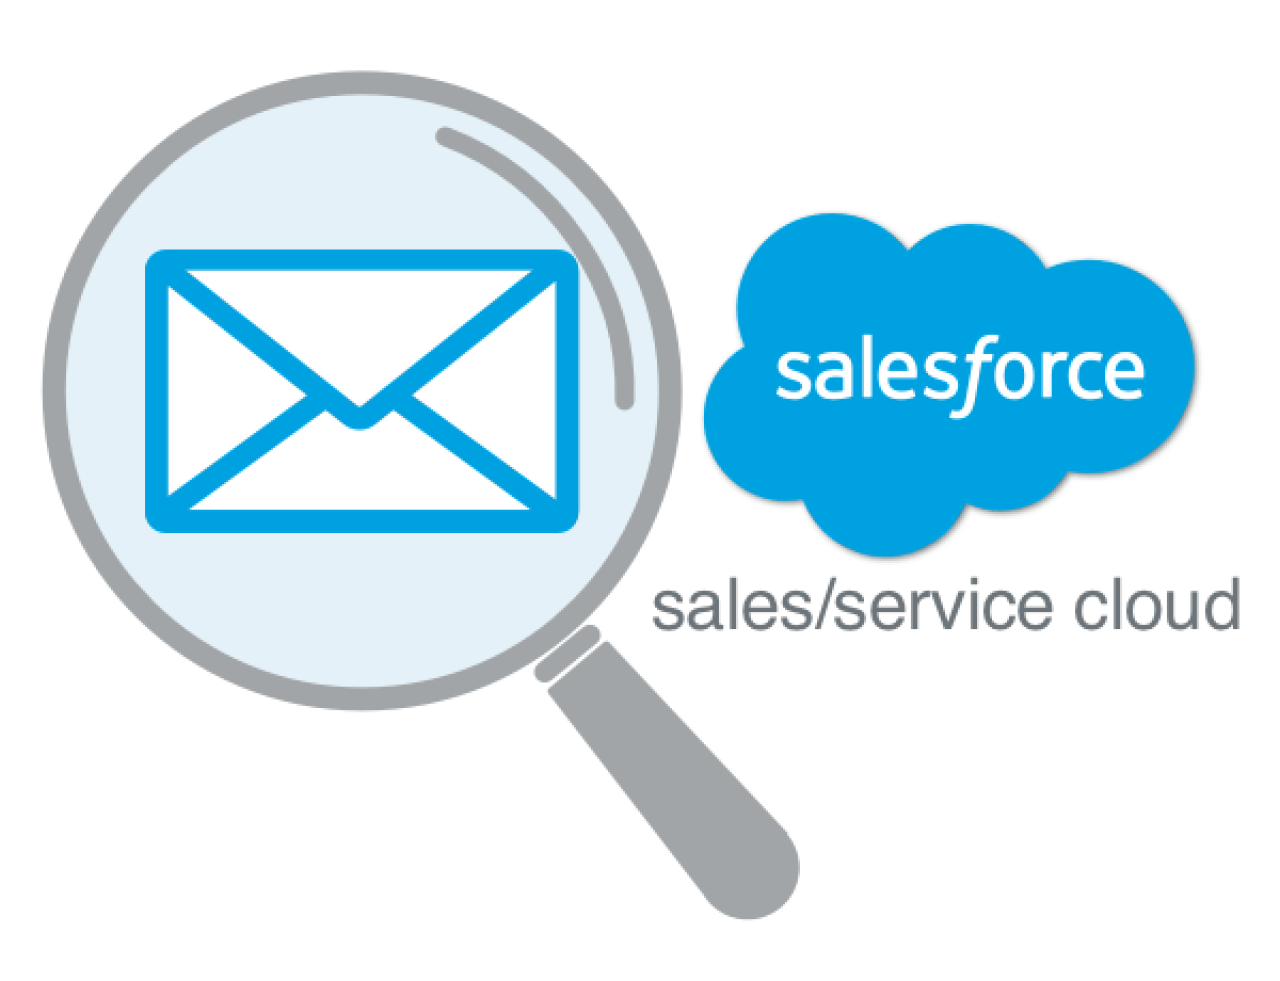 Salesforce Sales and Service Cloud logo next to a magnifying glass showing an envelope.